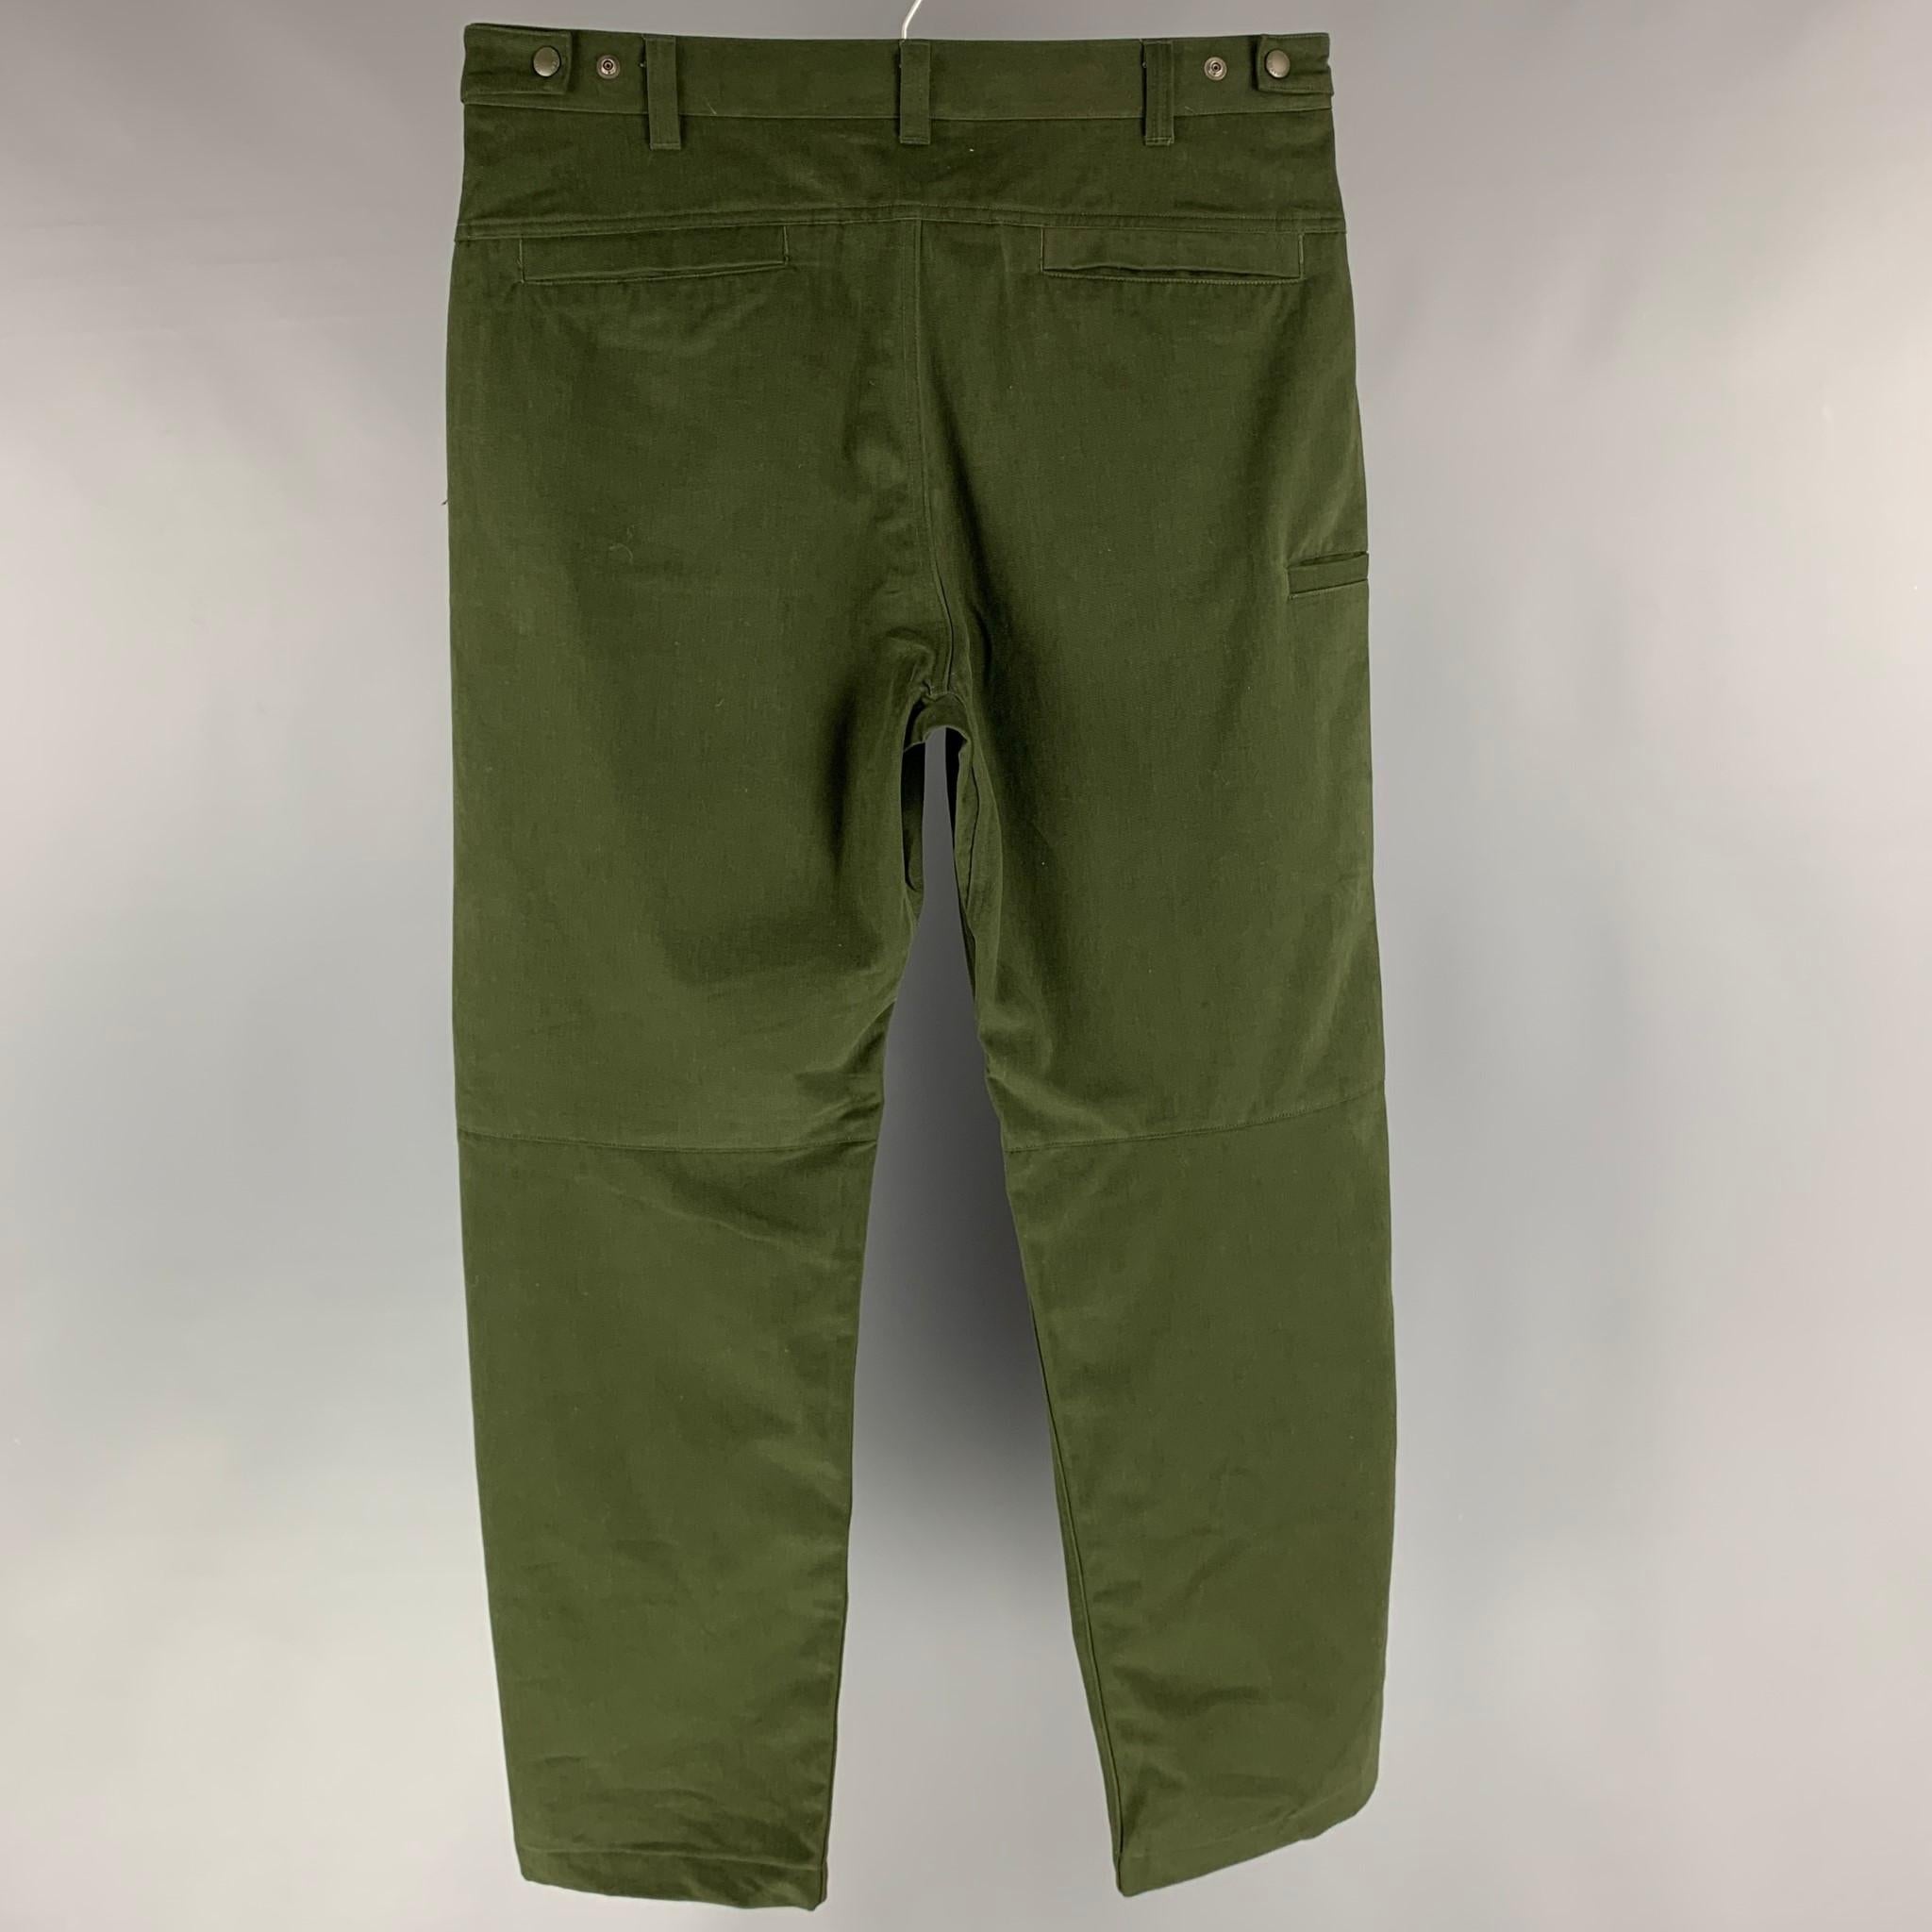 Black HAVEN Size L Green Solid Cotton Zip Fly Casual Pants